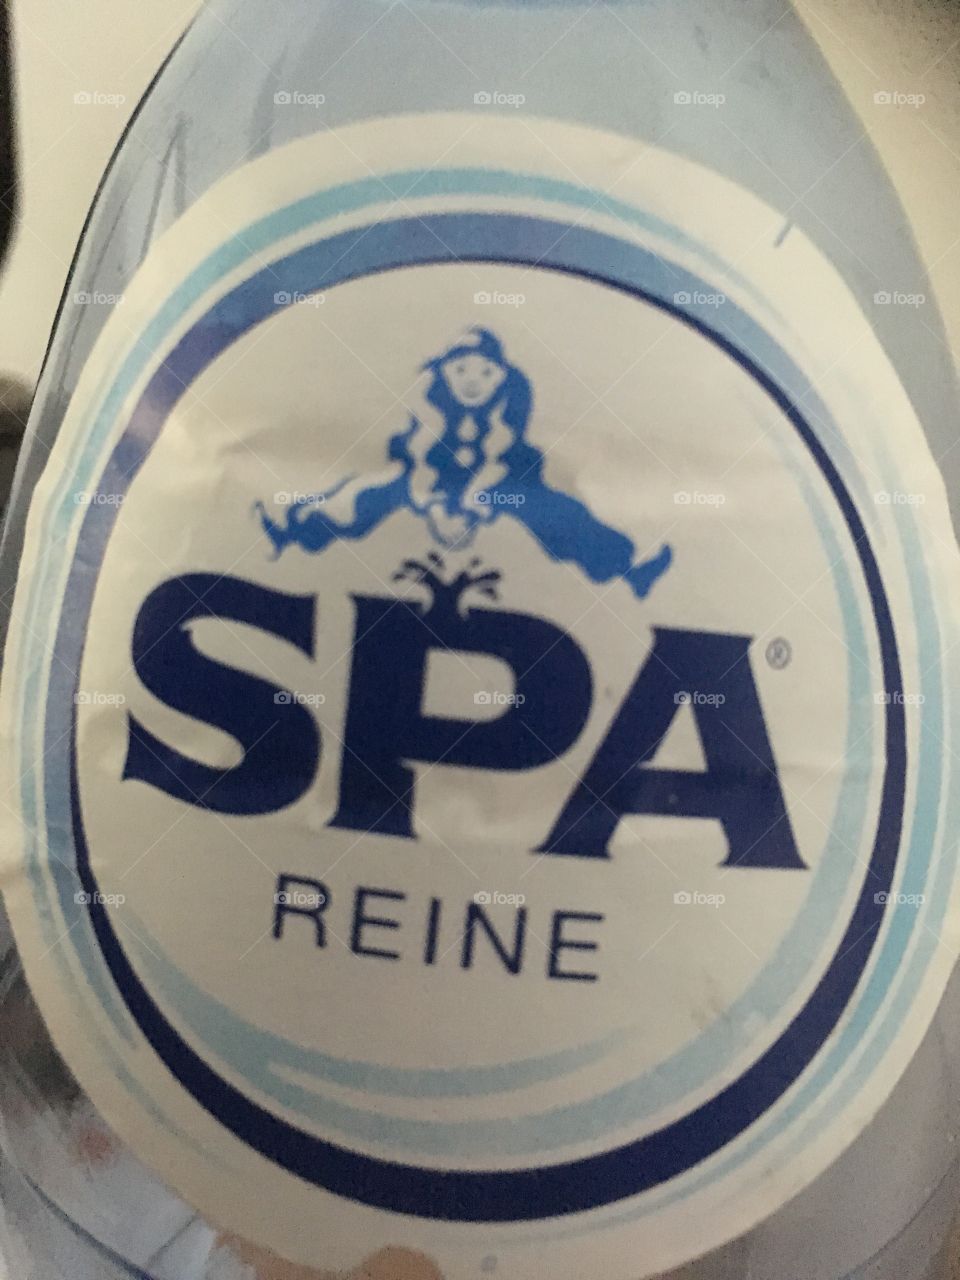 Spa water